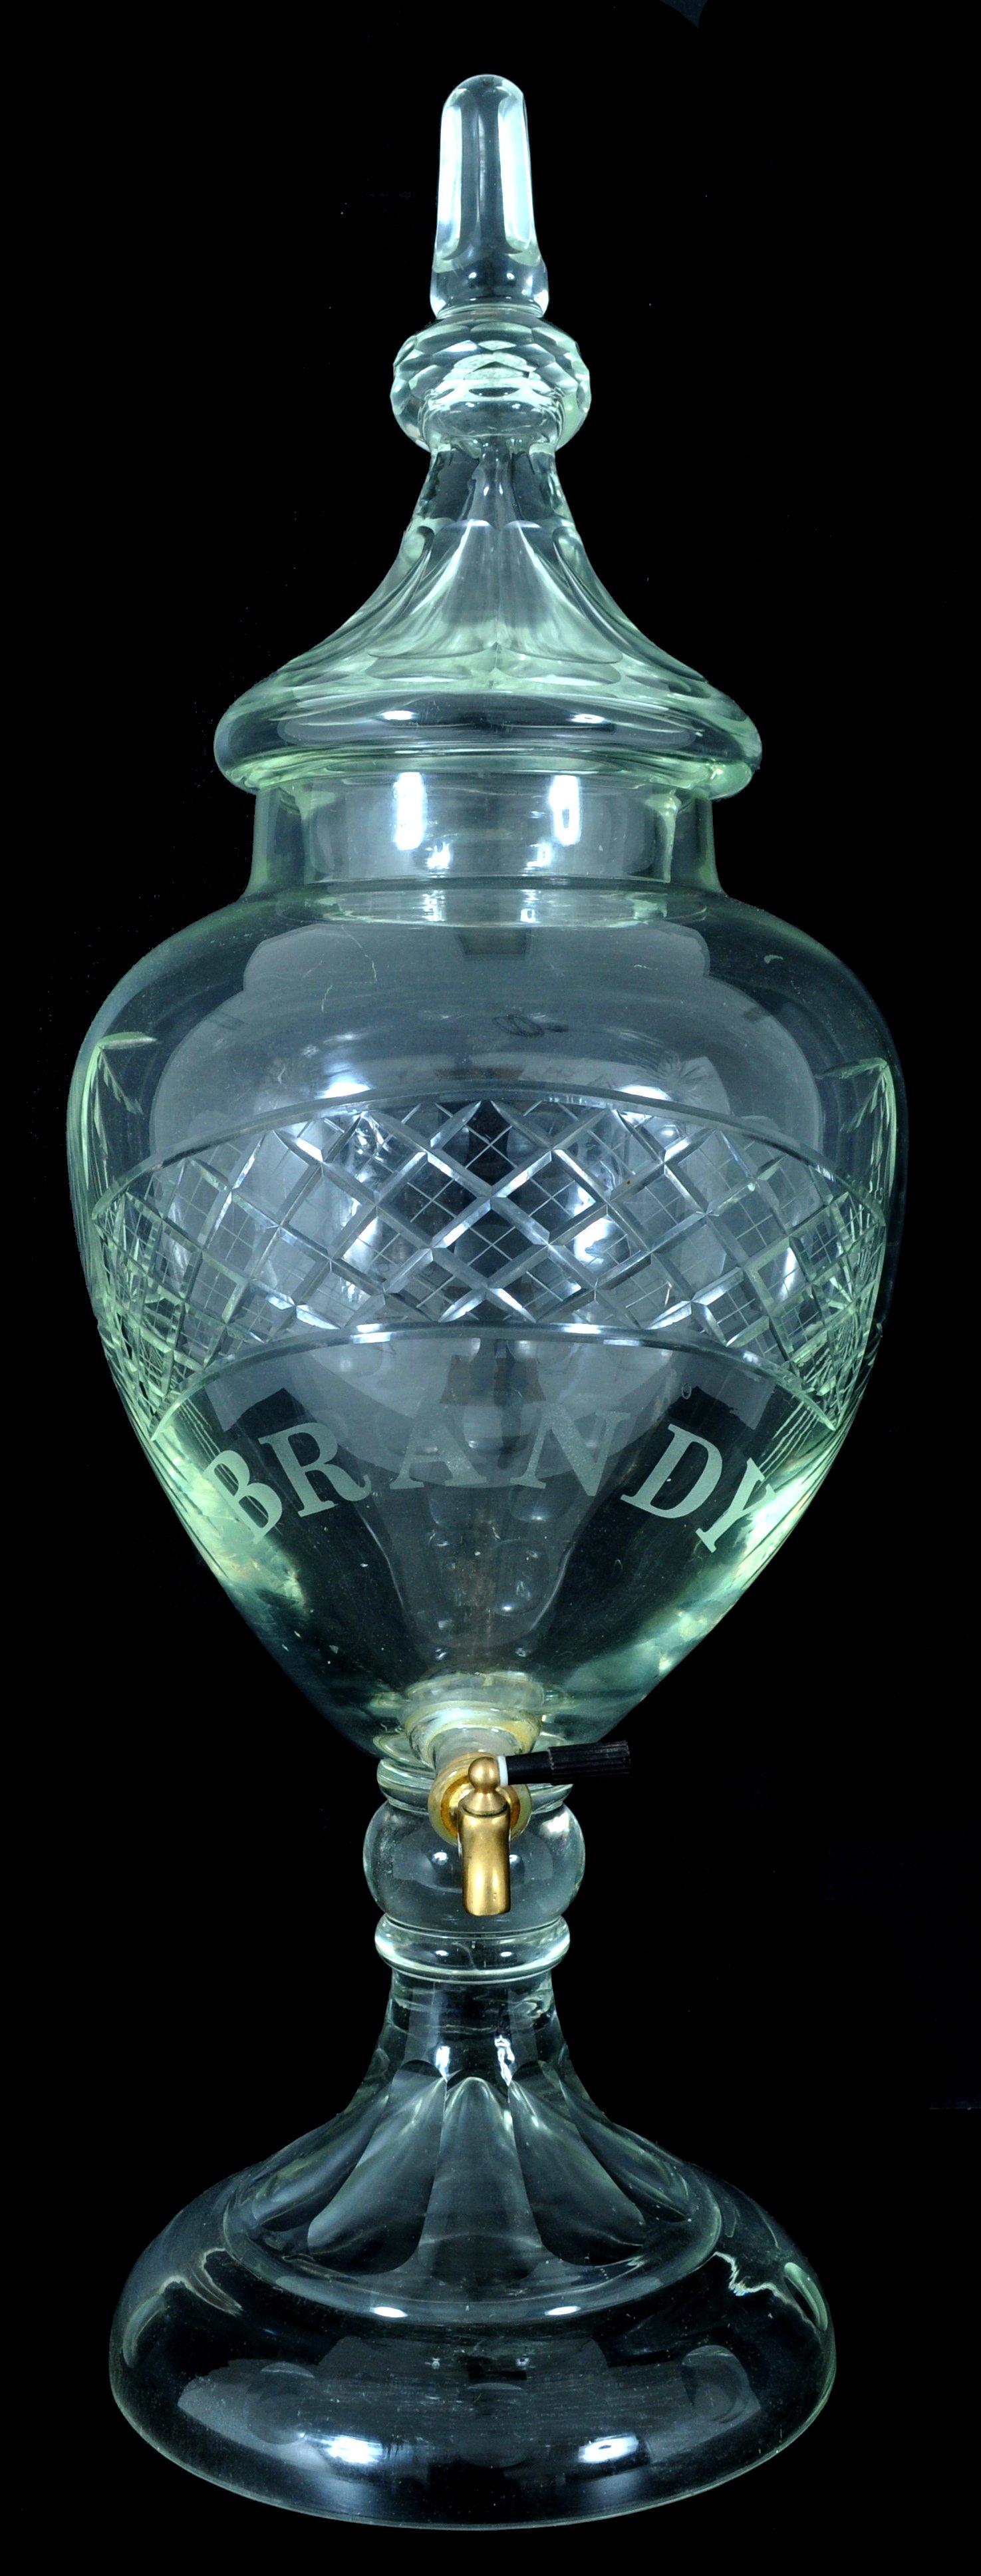 A rare Antique American crystal brandy/liquor bar dispenser, circa 1880.
The crystal dispenser is of monumental size. The lidded dispenser having a faceted lid with a cut & faceted finial above an engraved circular knop, the globular body is also